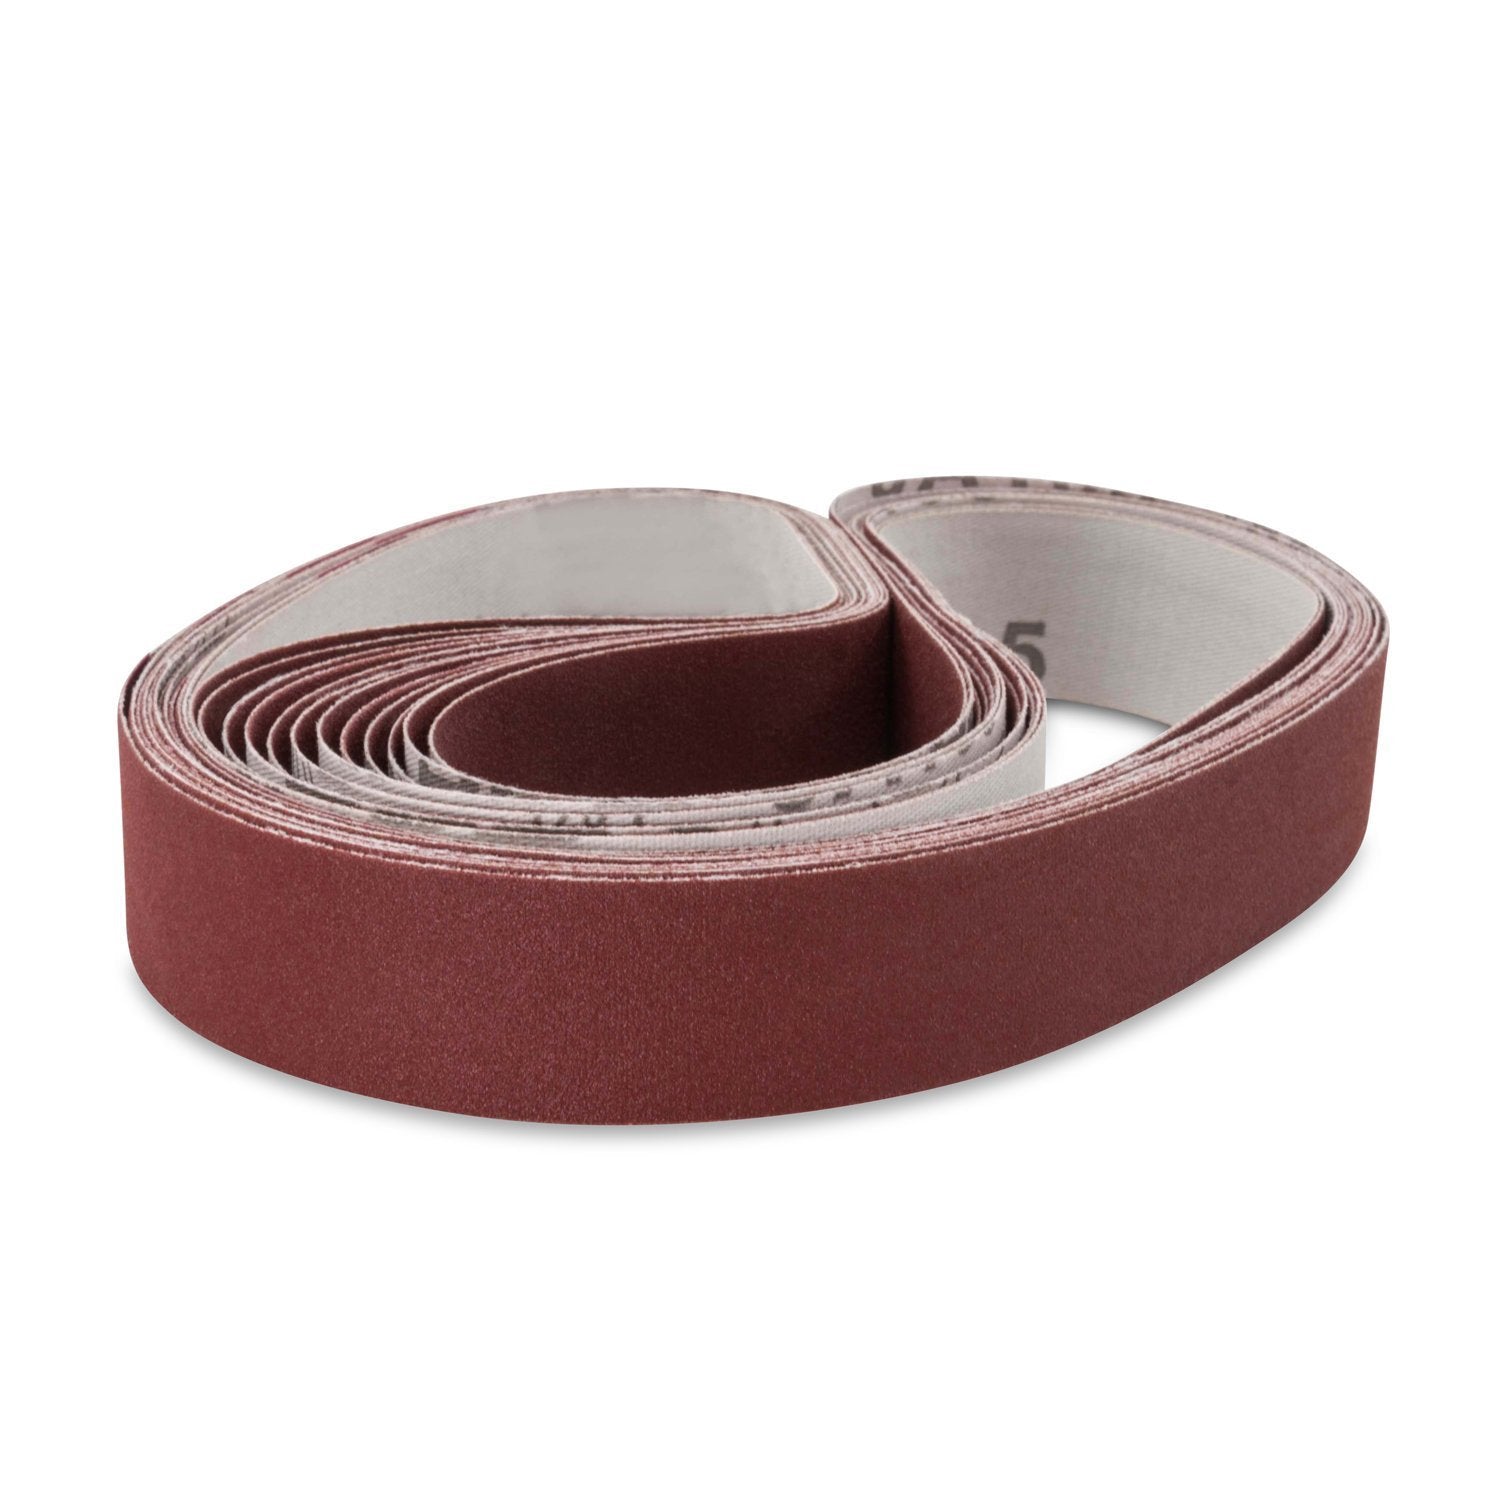 1 X 60 Inch Flexible Metalworking Sanding Belts, 12 Pack - Red Label Abrasives